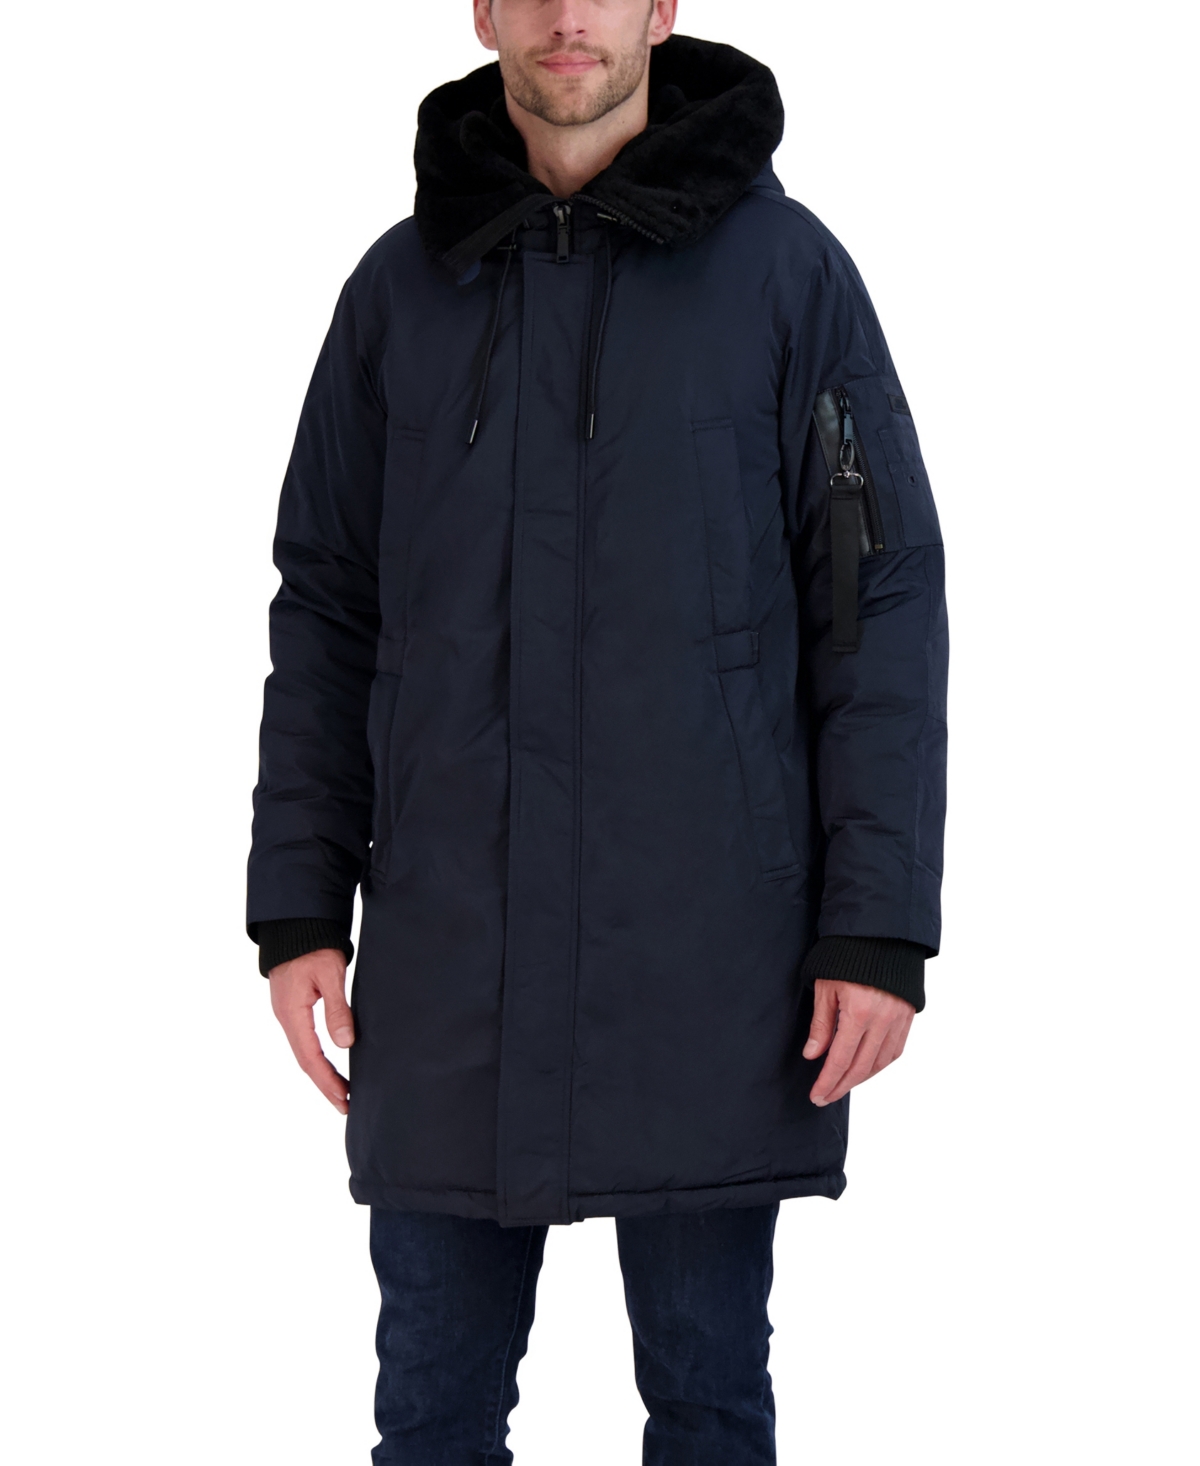 Men's Long Parka with Faux Fur Lined Hood - Navy